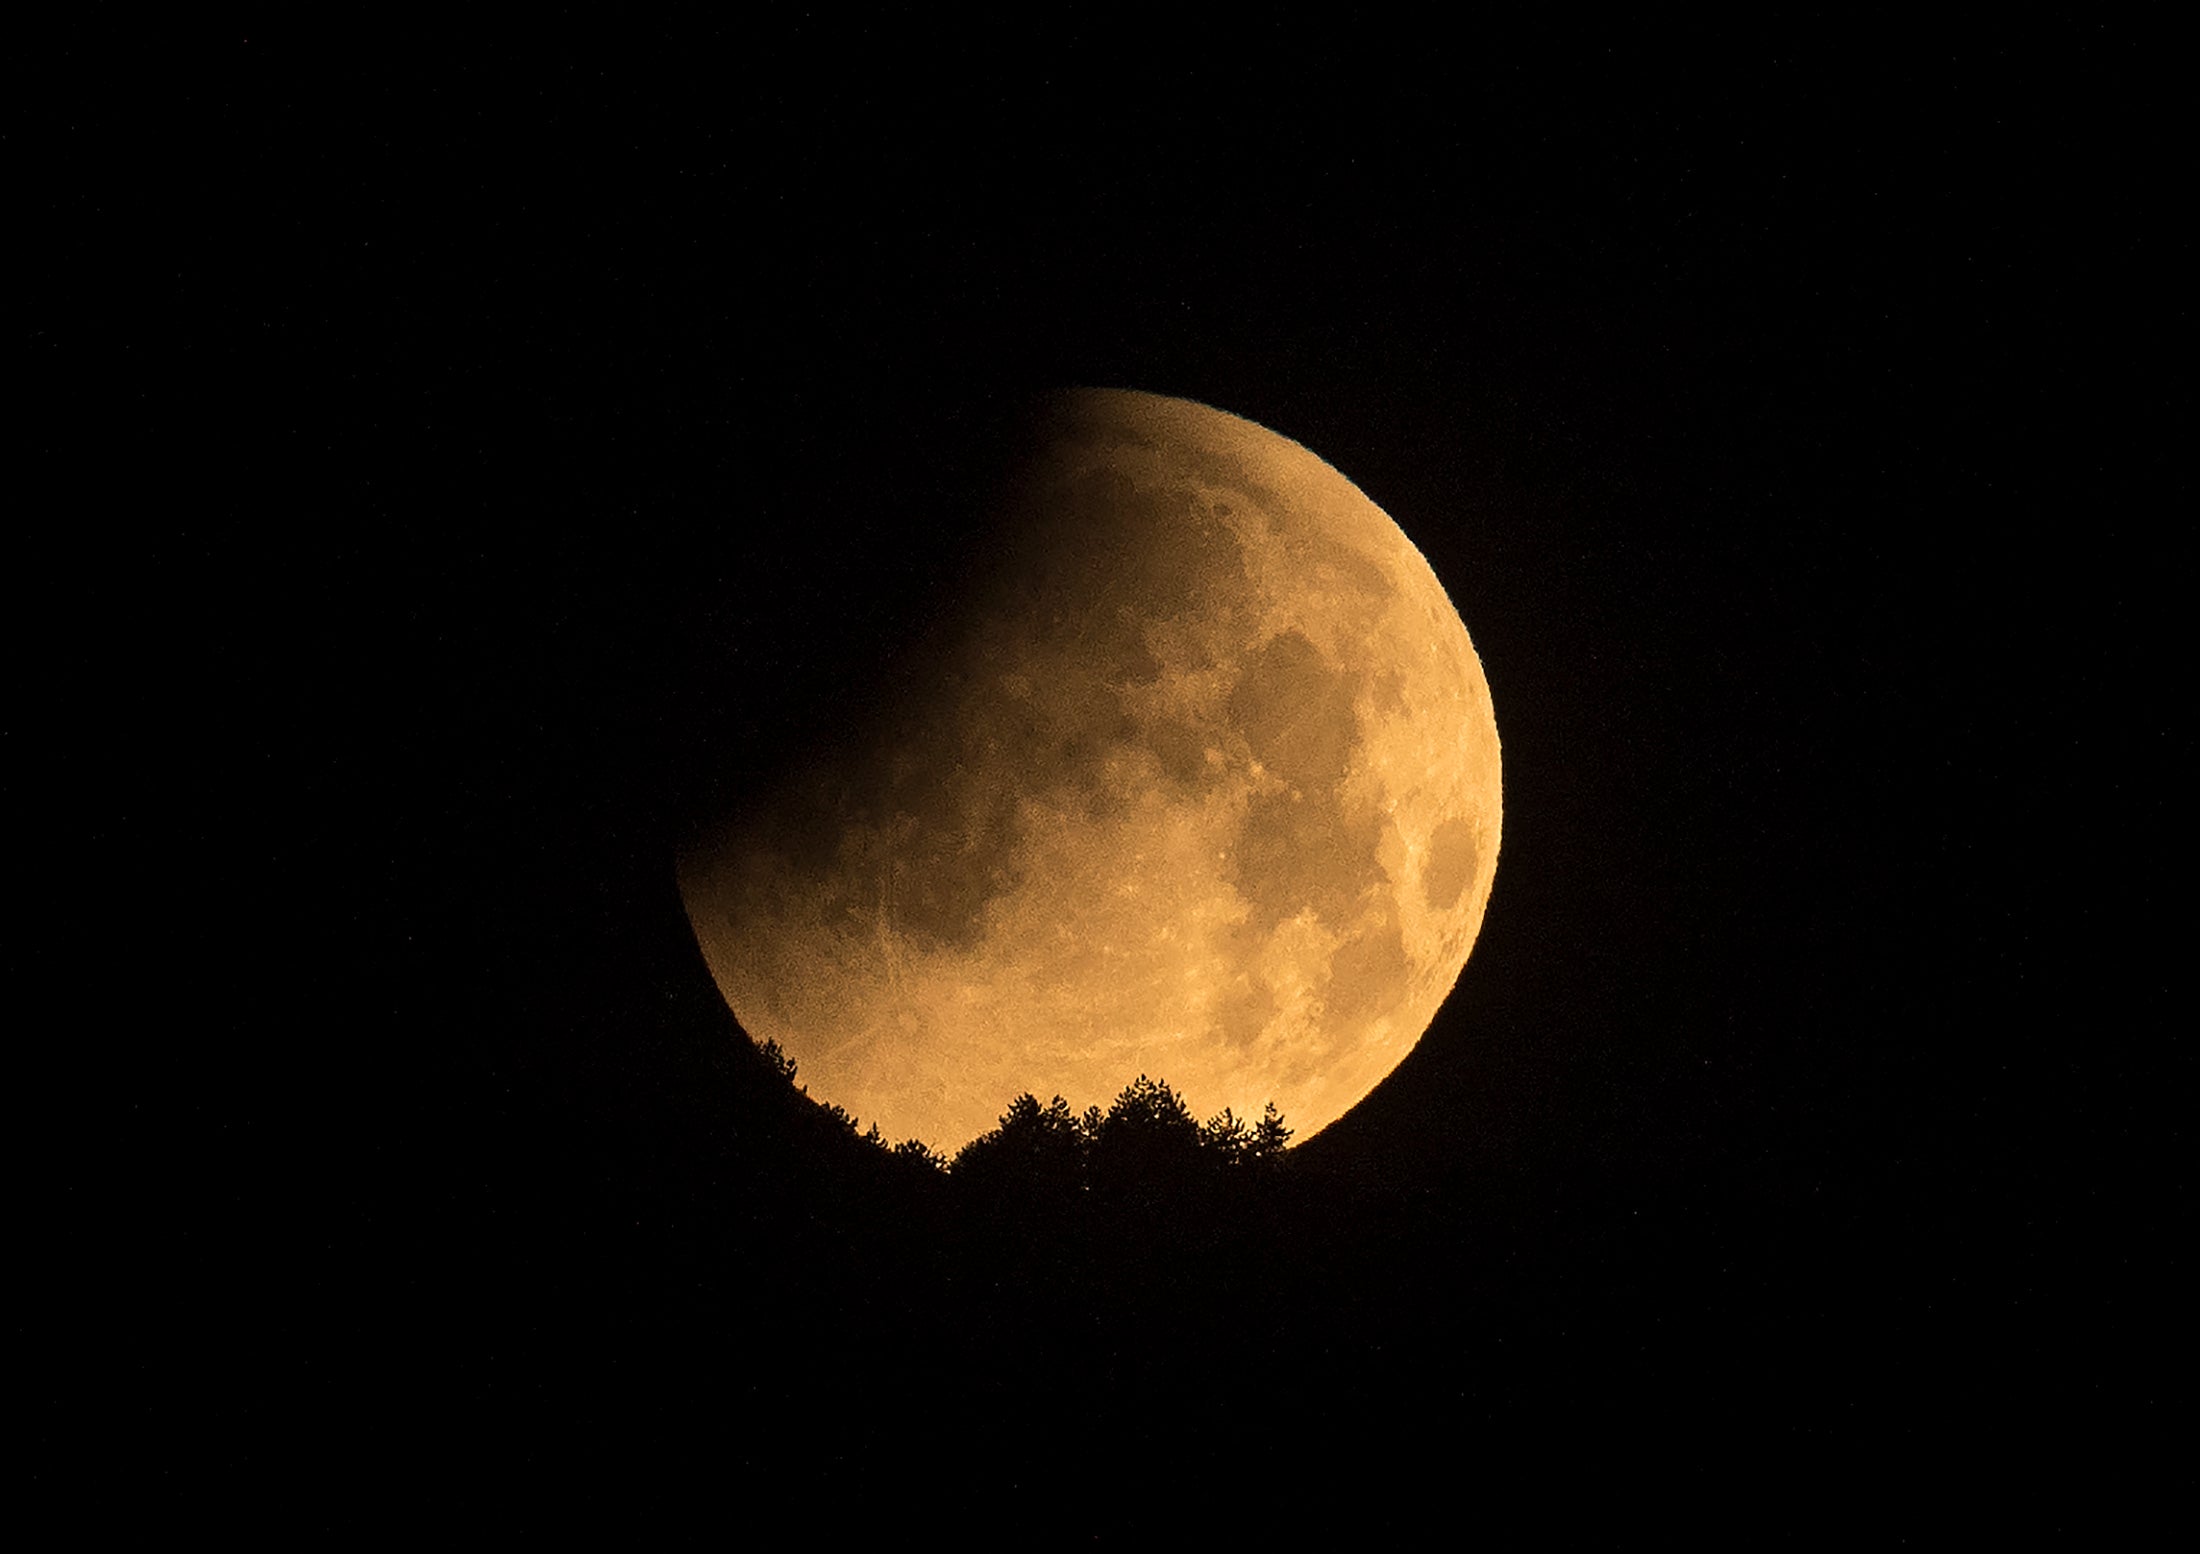 The moon is seen during a penumbral lunar eclipse in Skopje, on 16 May 2022